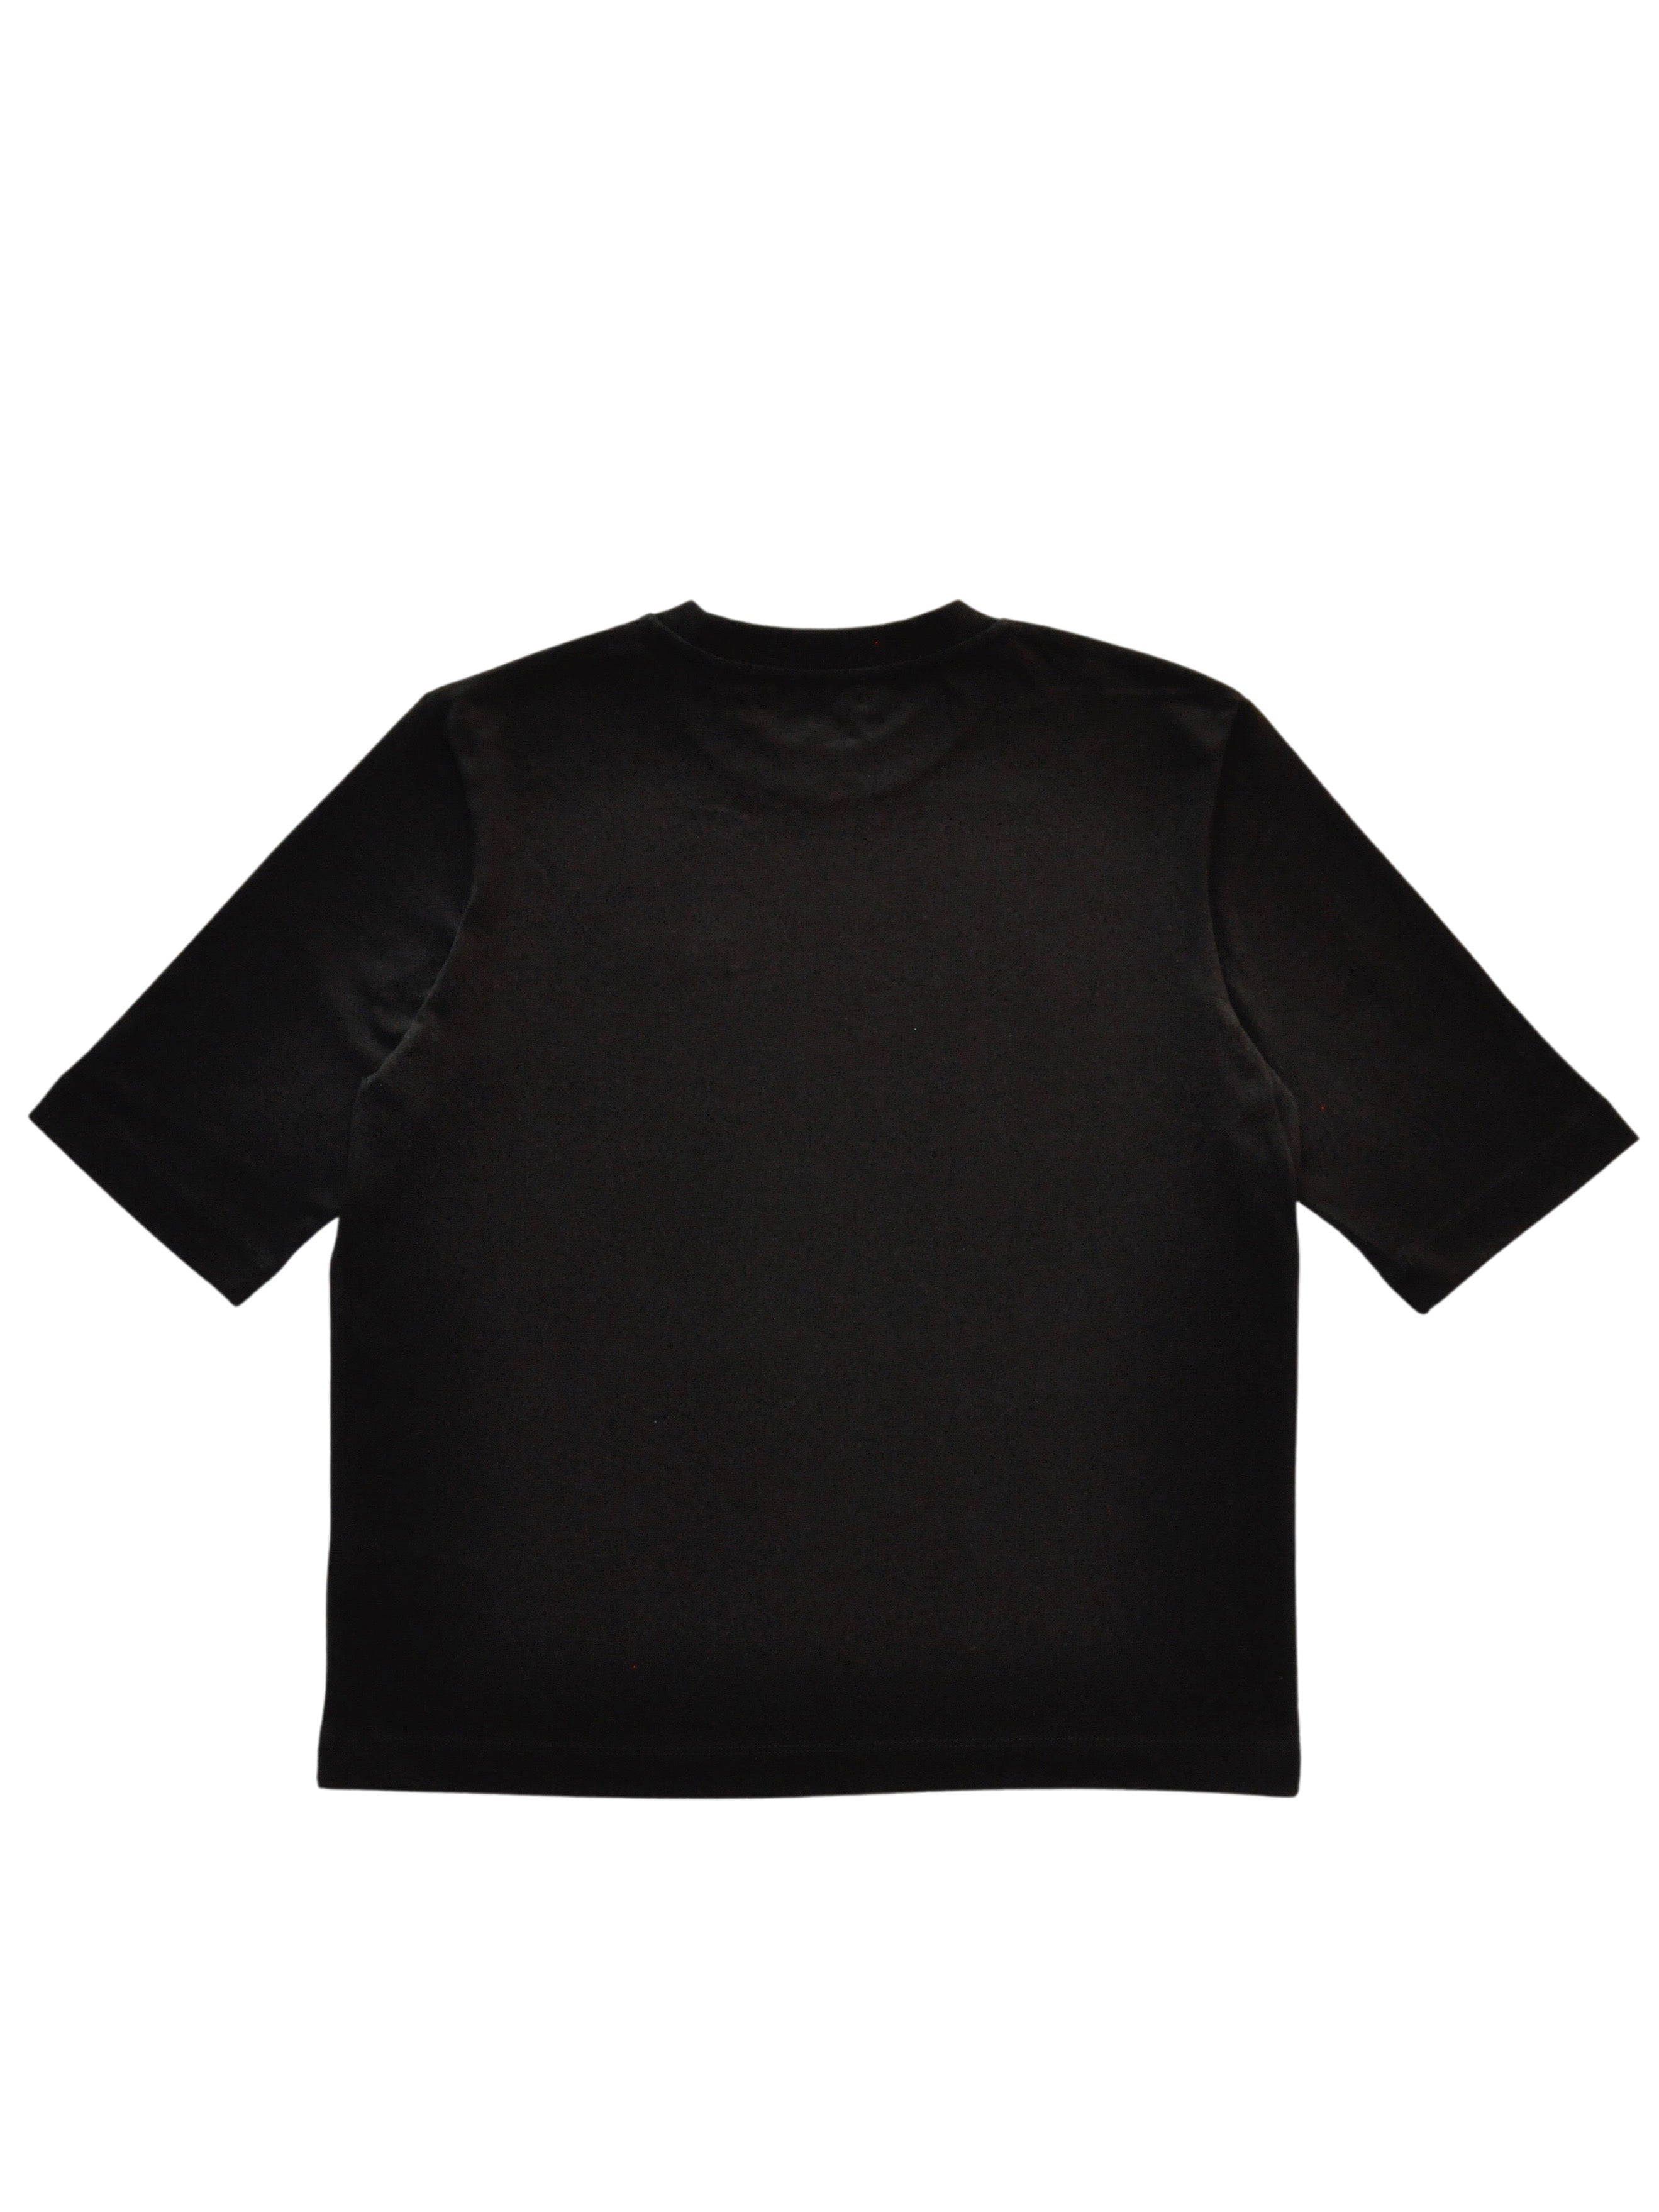 BY11 Organic Cotton Embroidered Easy Fit T-shirt - Black